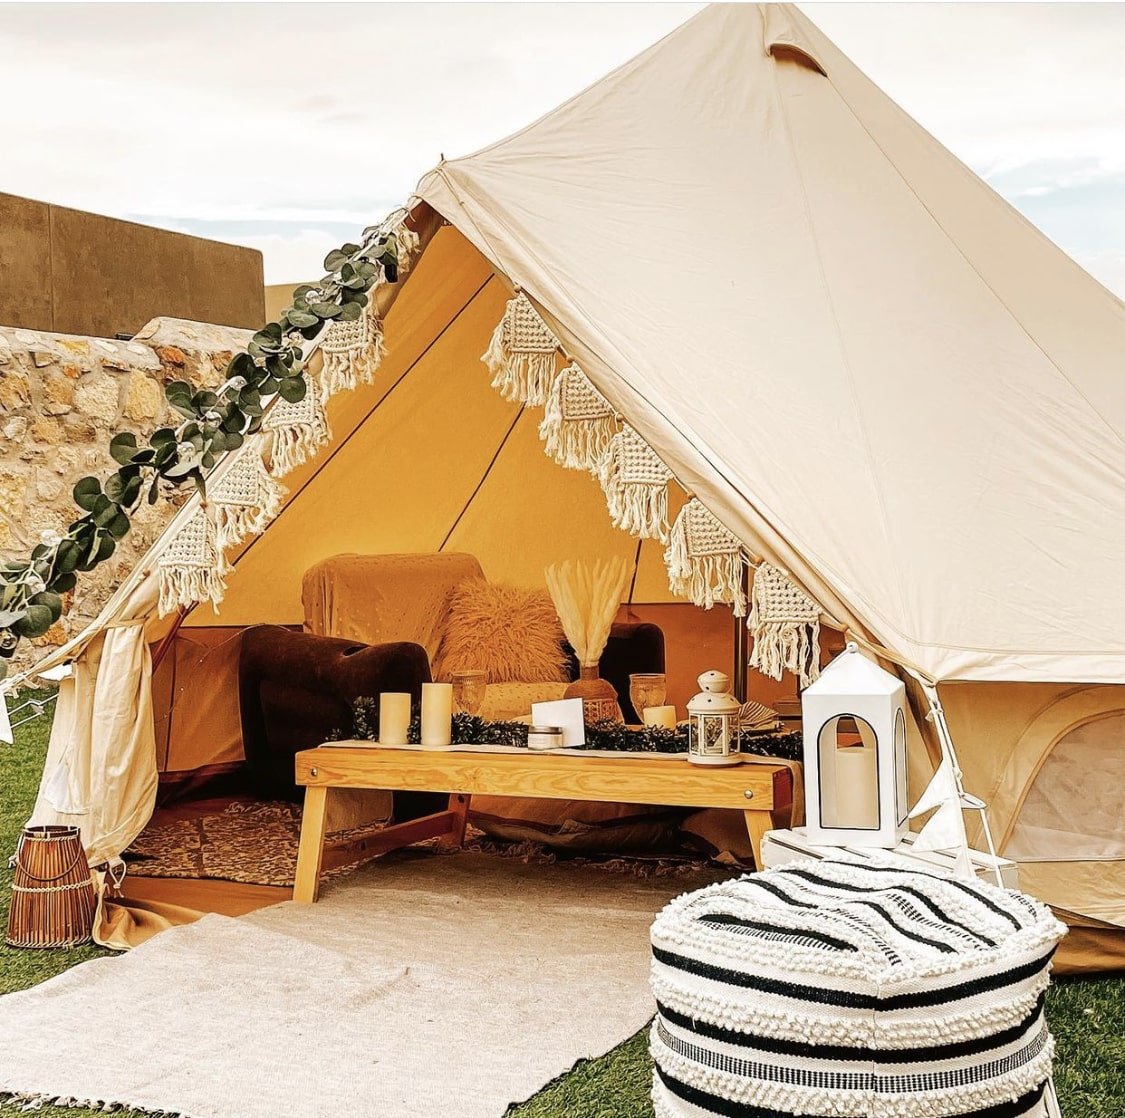 Star Glampers Sleepovers - Sleepover Party Tents in New Mexico